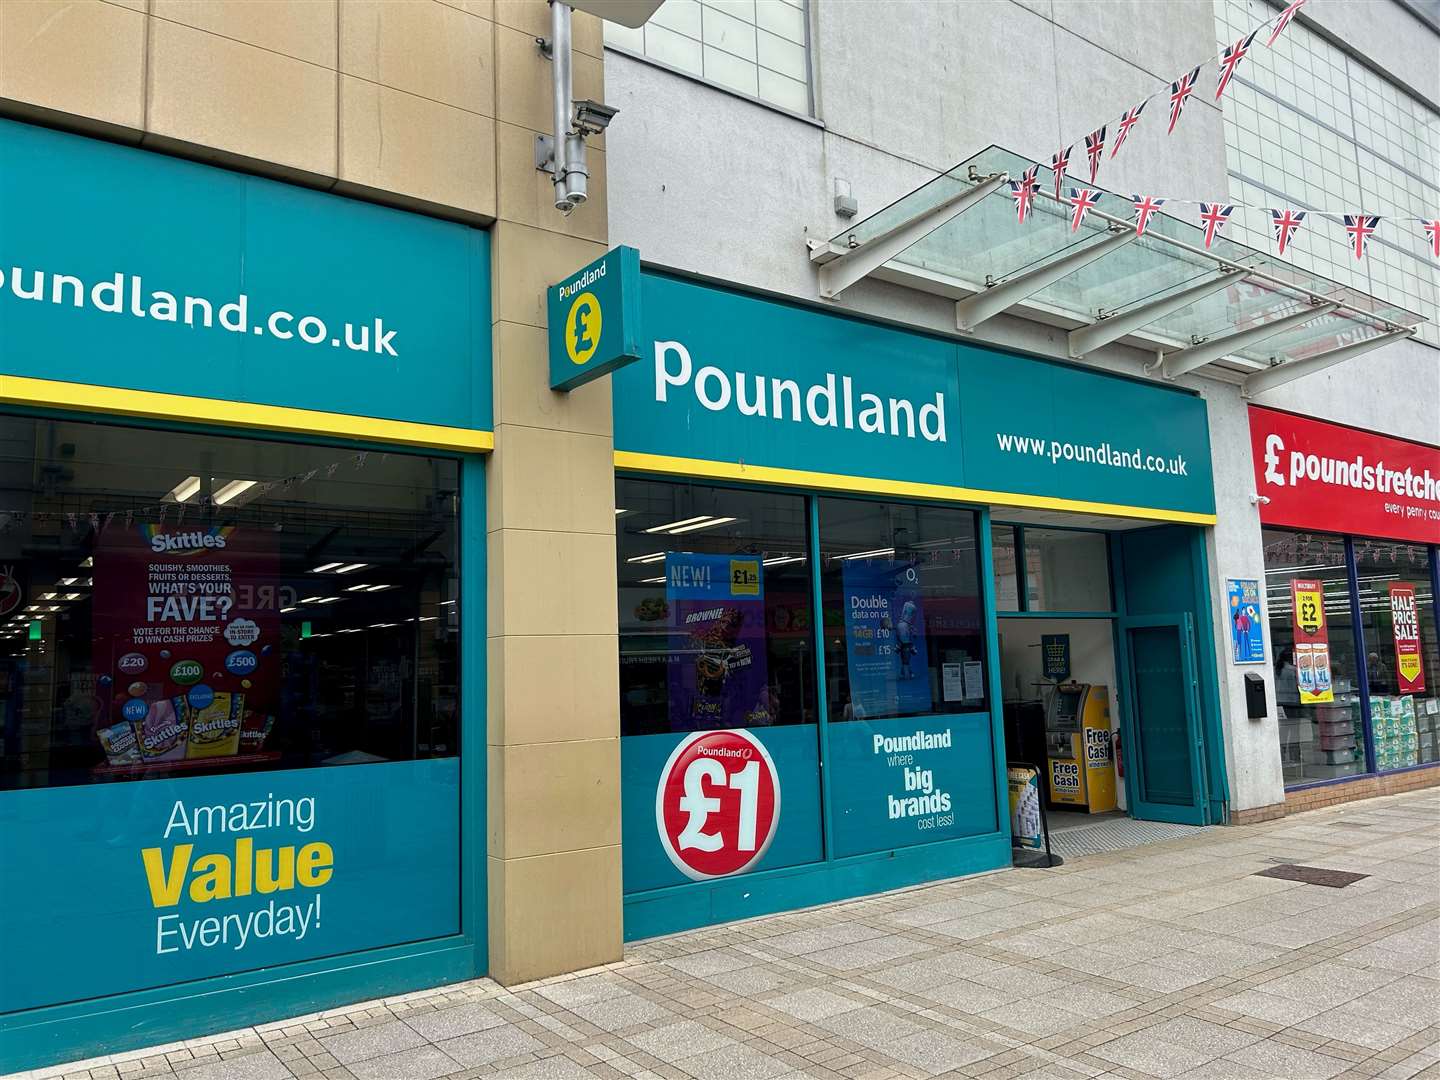 The Poundland store on Broad Street will close at the start of June